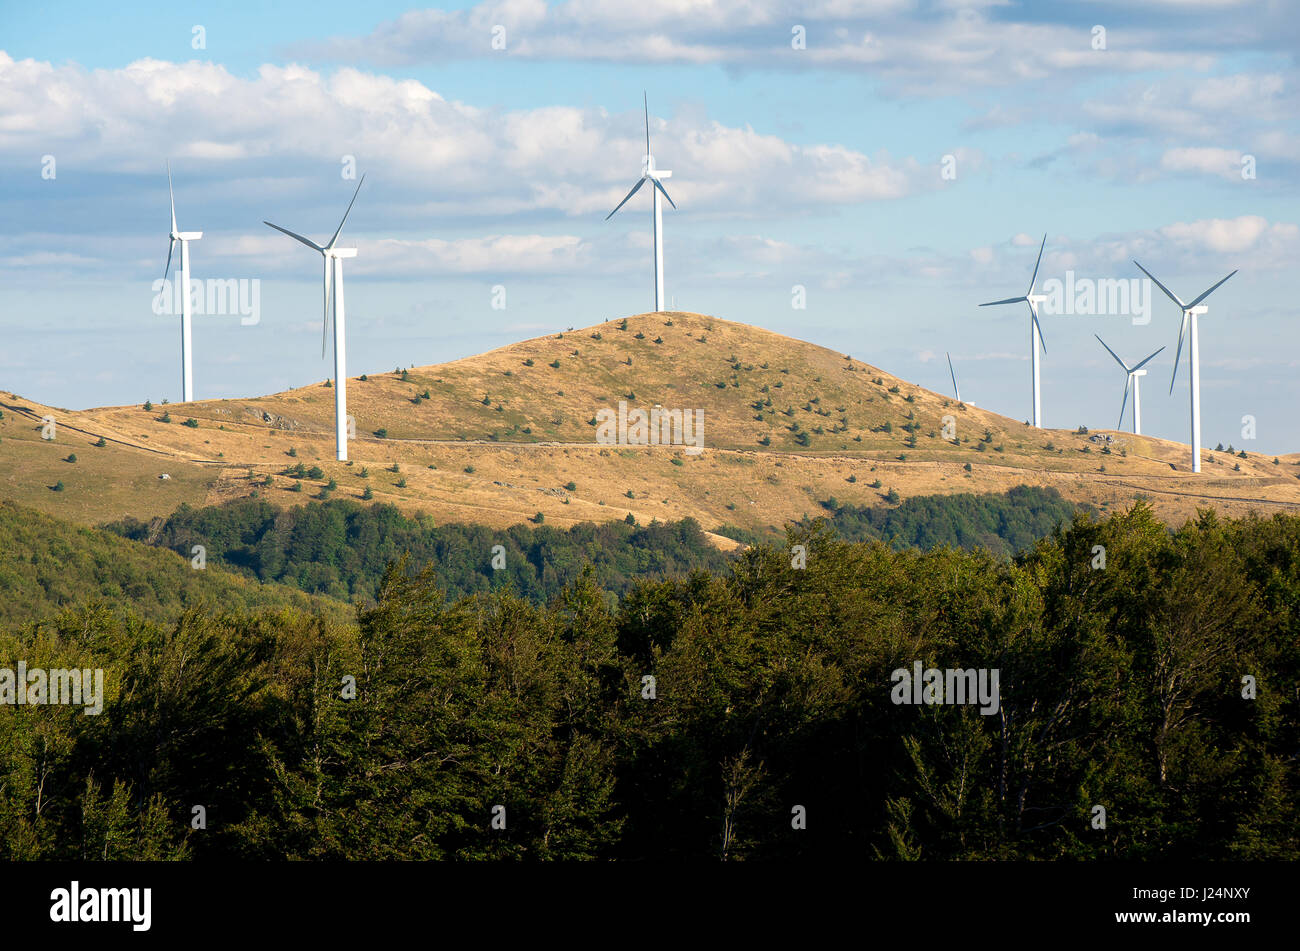 Horizontal wind turbines.  Renewable energy. Obtaining electricity from wind. Preservation of nature. Stock Photo